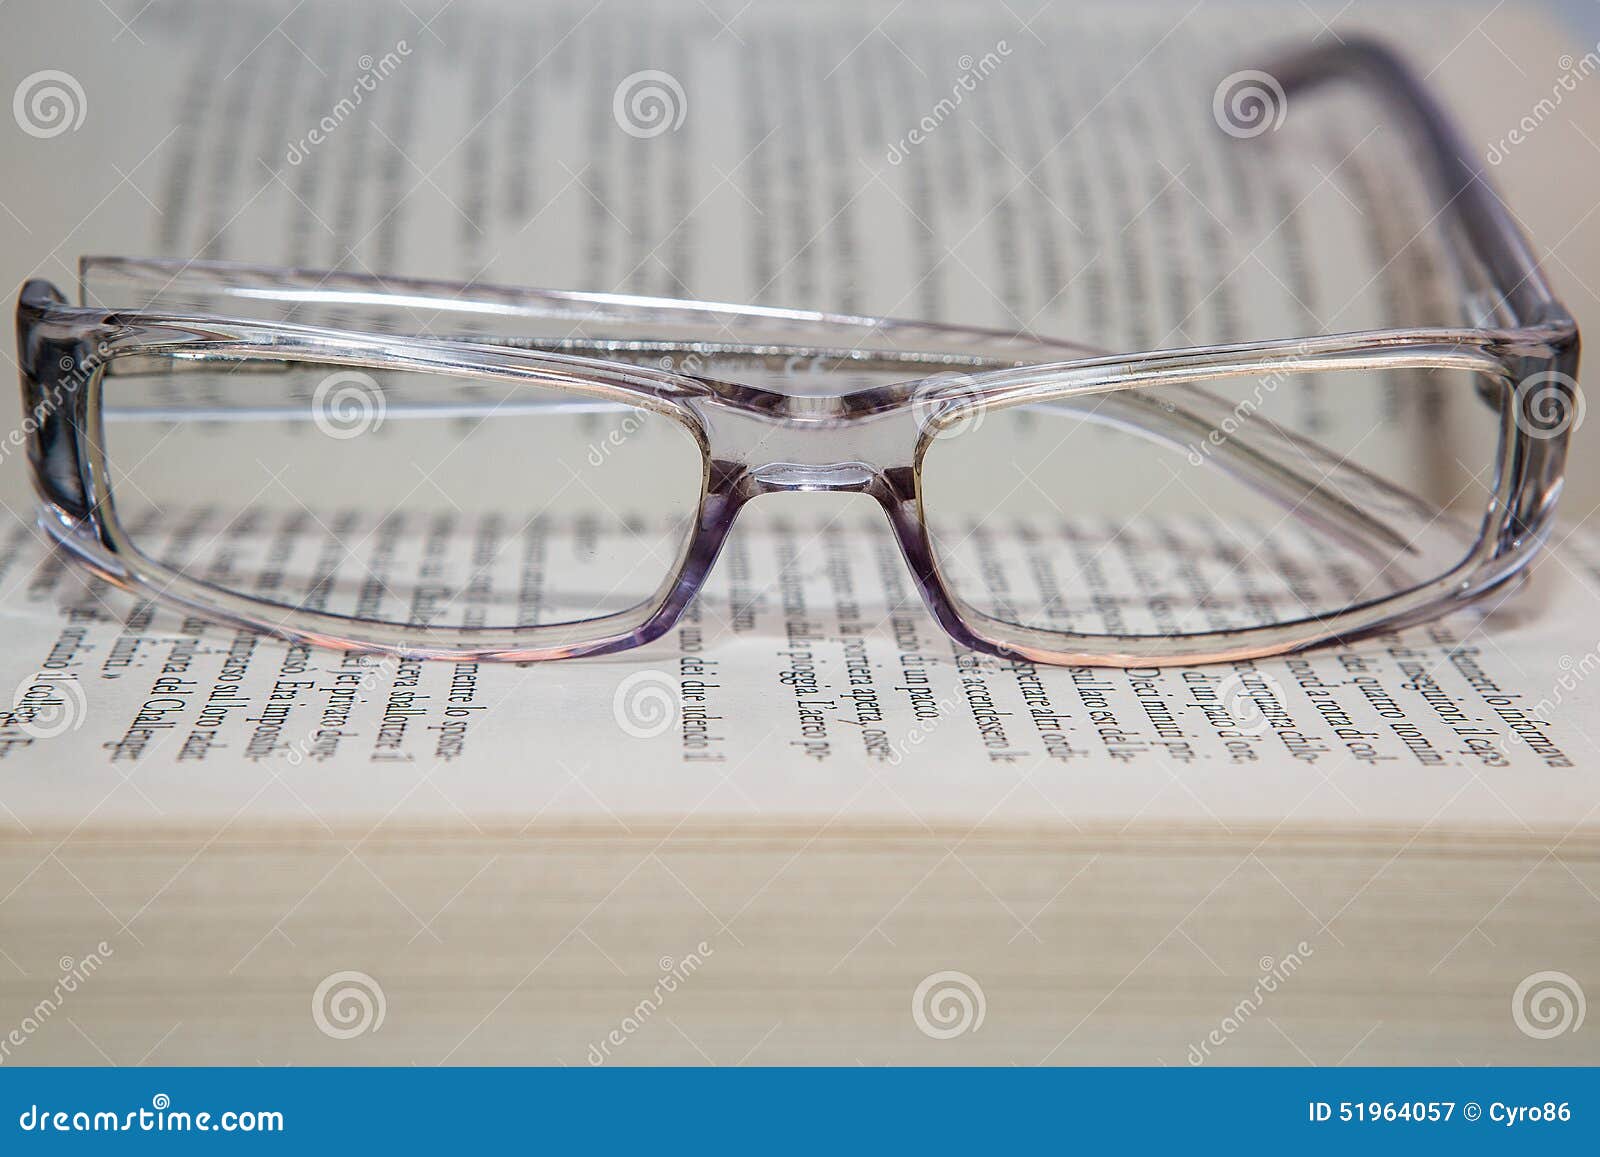 eyeglasses with book